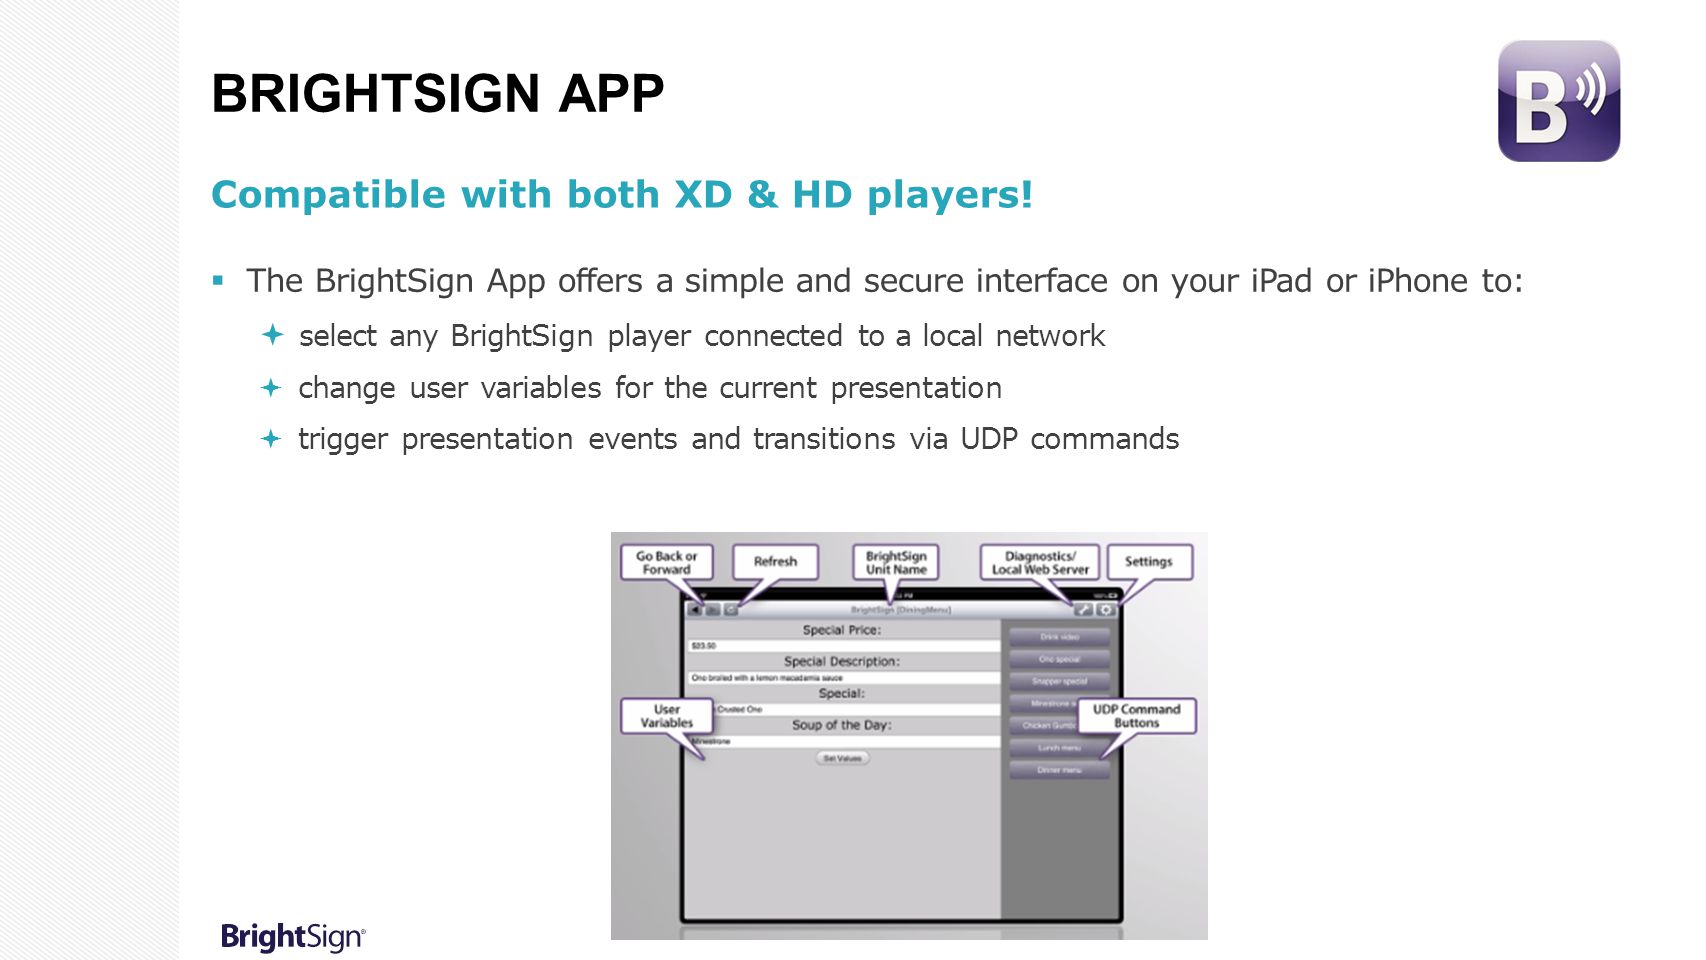 BrightSign App Compatible with both XD & HD players!